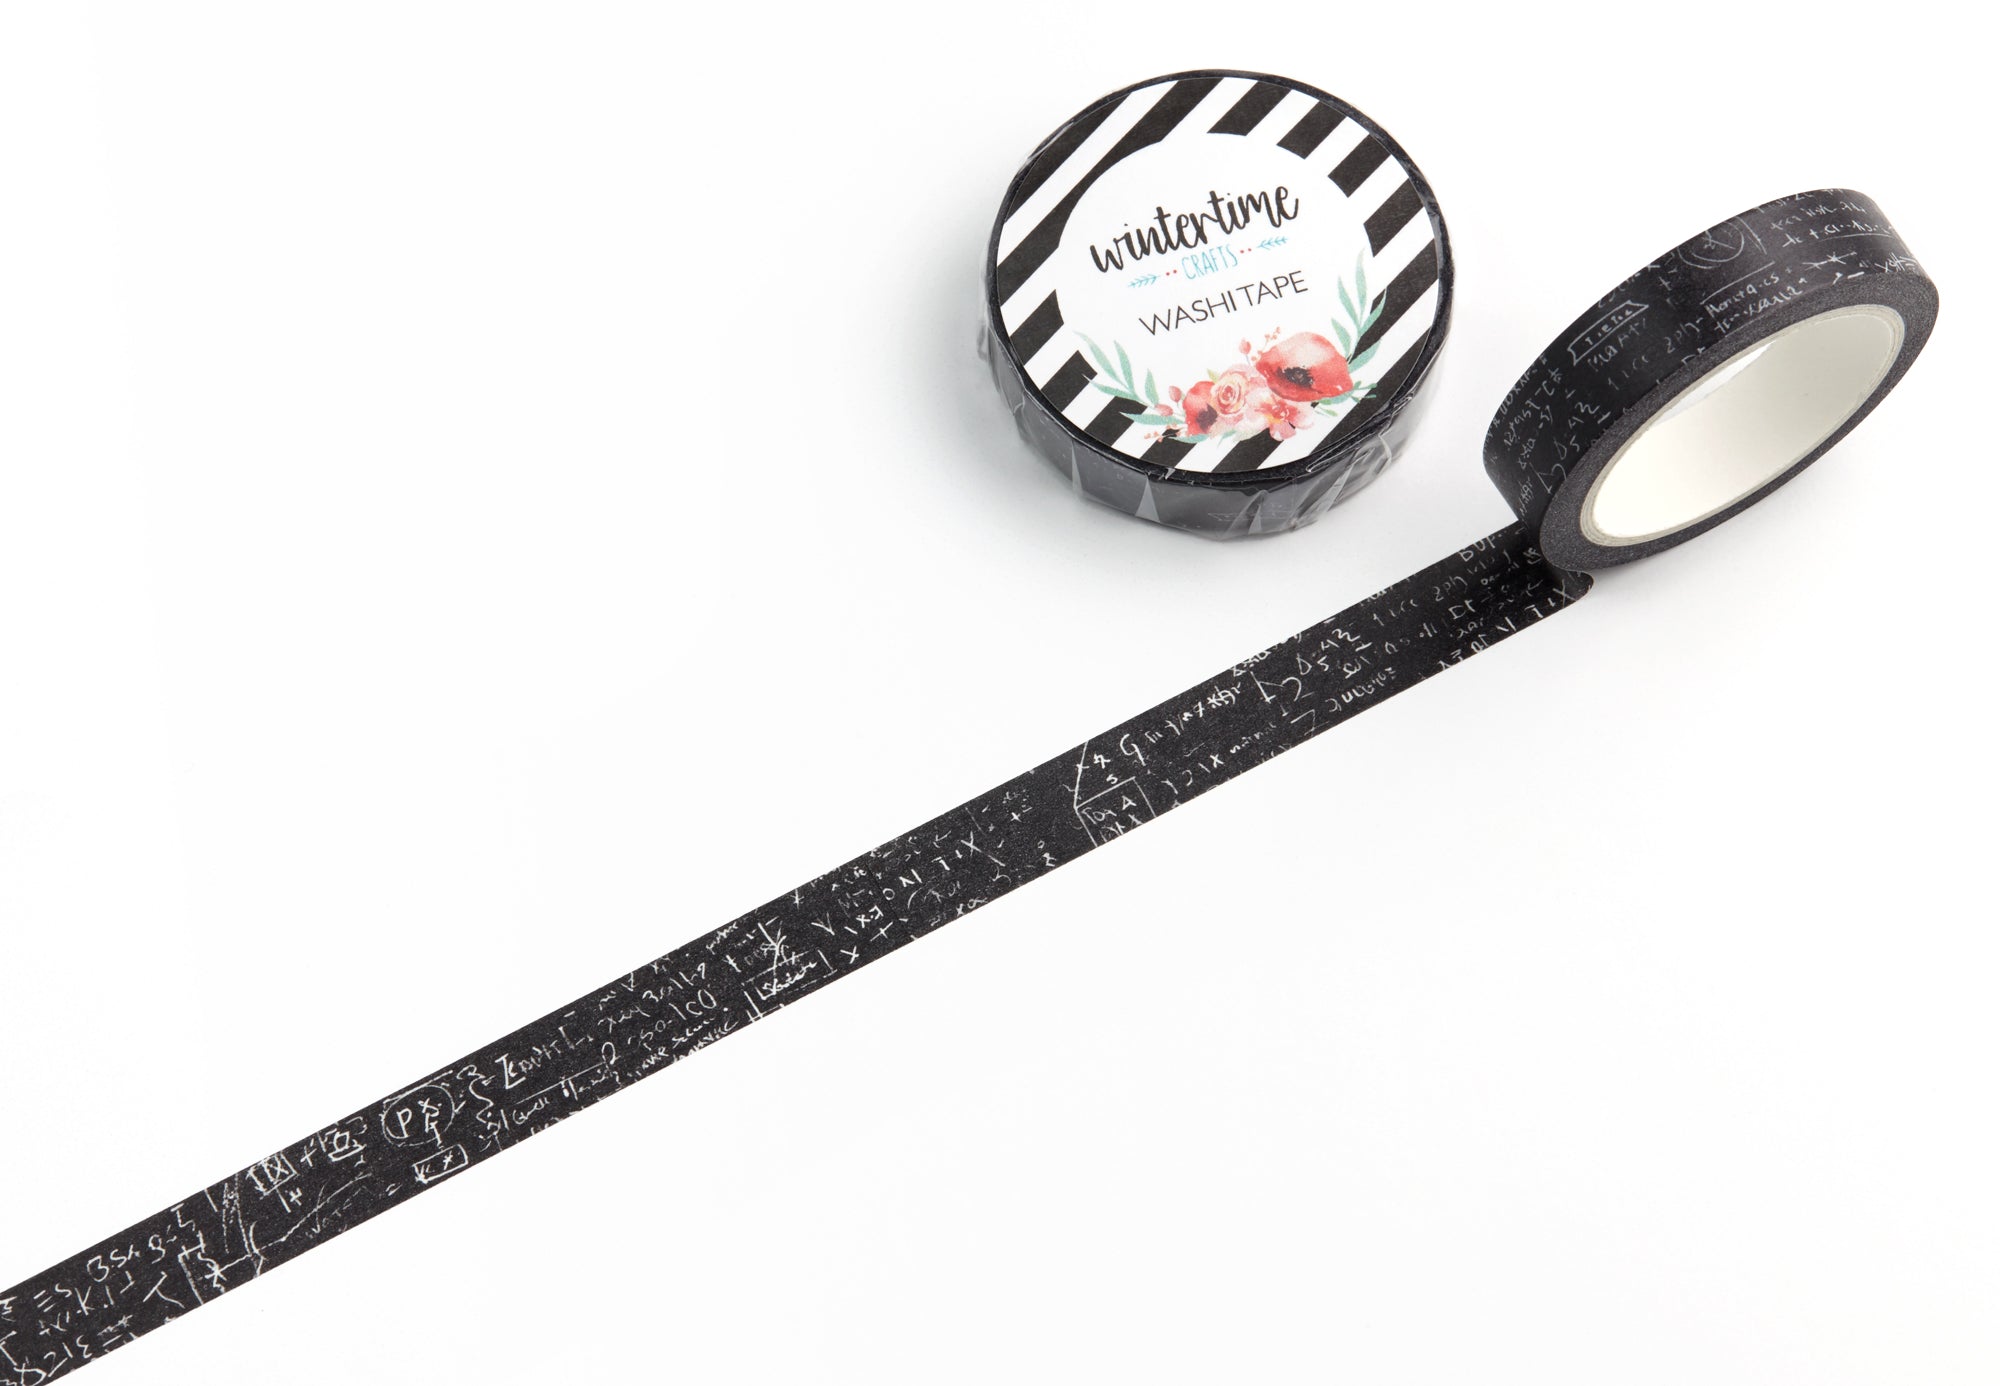 Slim 10mm washi tape with scribbles and handwritten notes on a black background. Exclusive design from Wintertime Crafts.